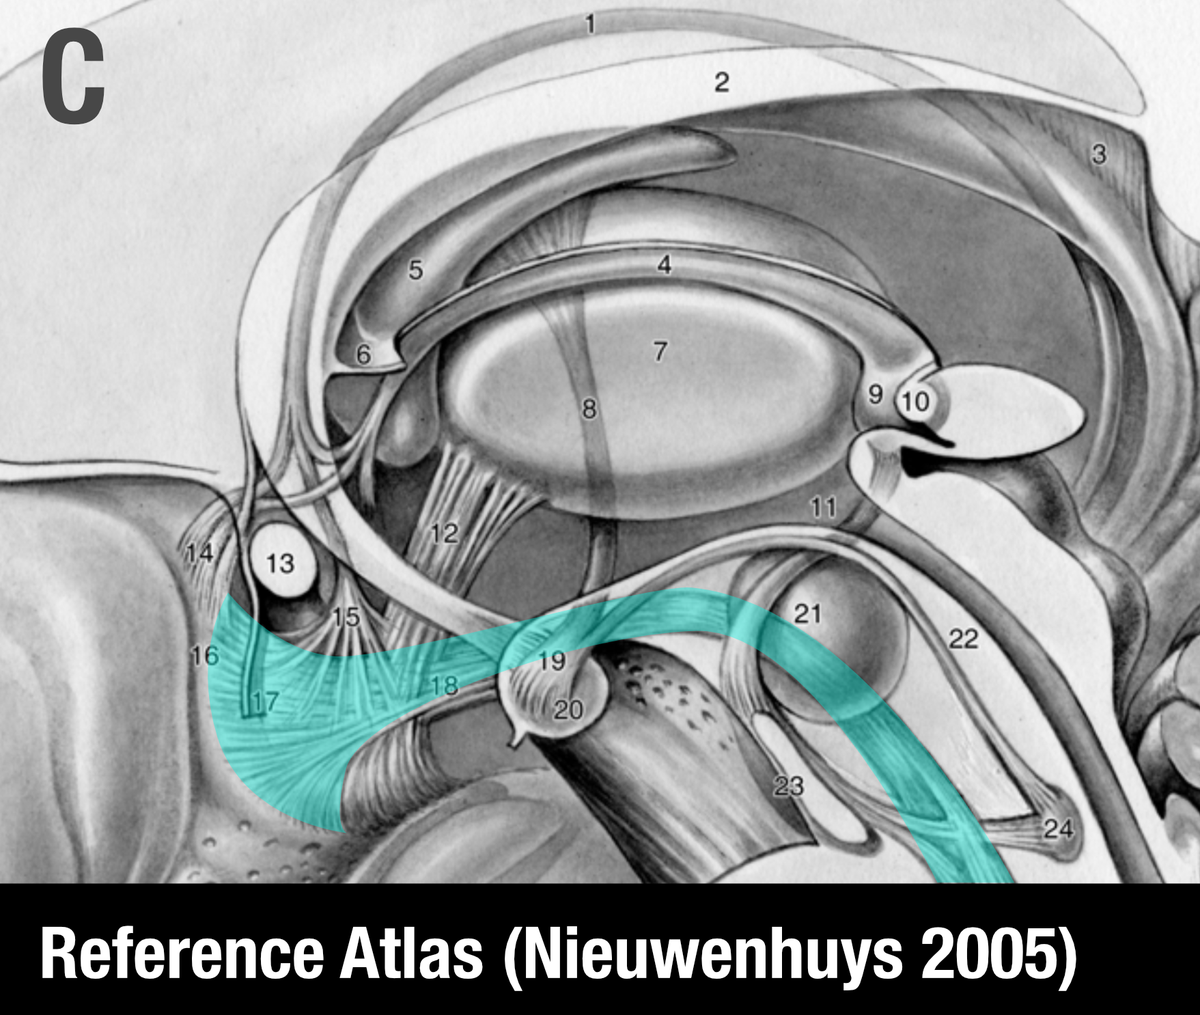 The MFB is a bundle that was predominantly characterized in the rat. One of the few people that published original work on it is Rudolf Nieuwenhuys – in his handbook, the MFB does not traverse within the anterior commissure.